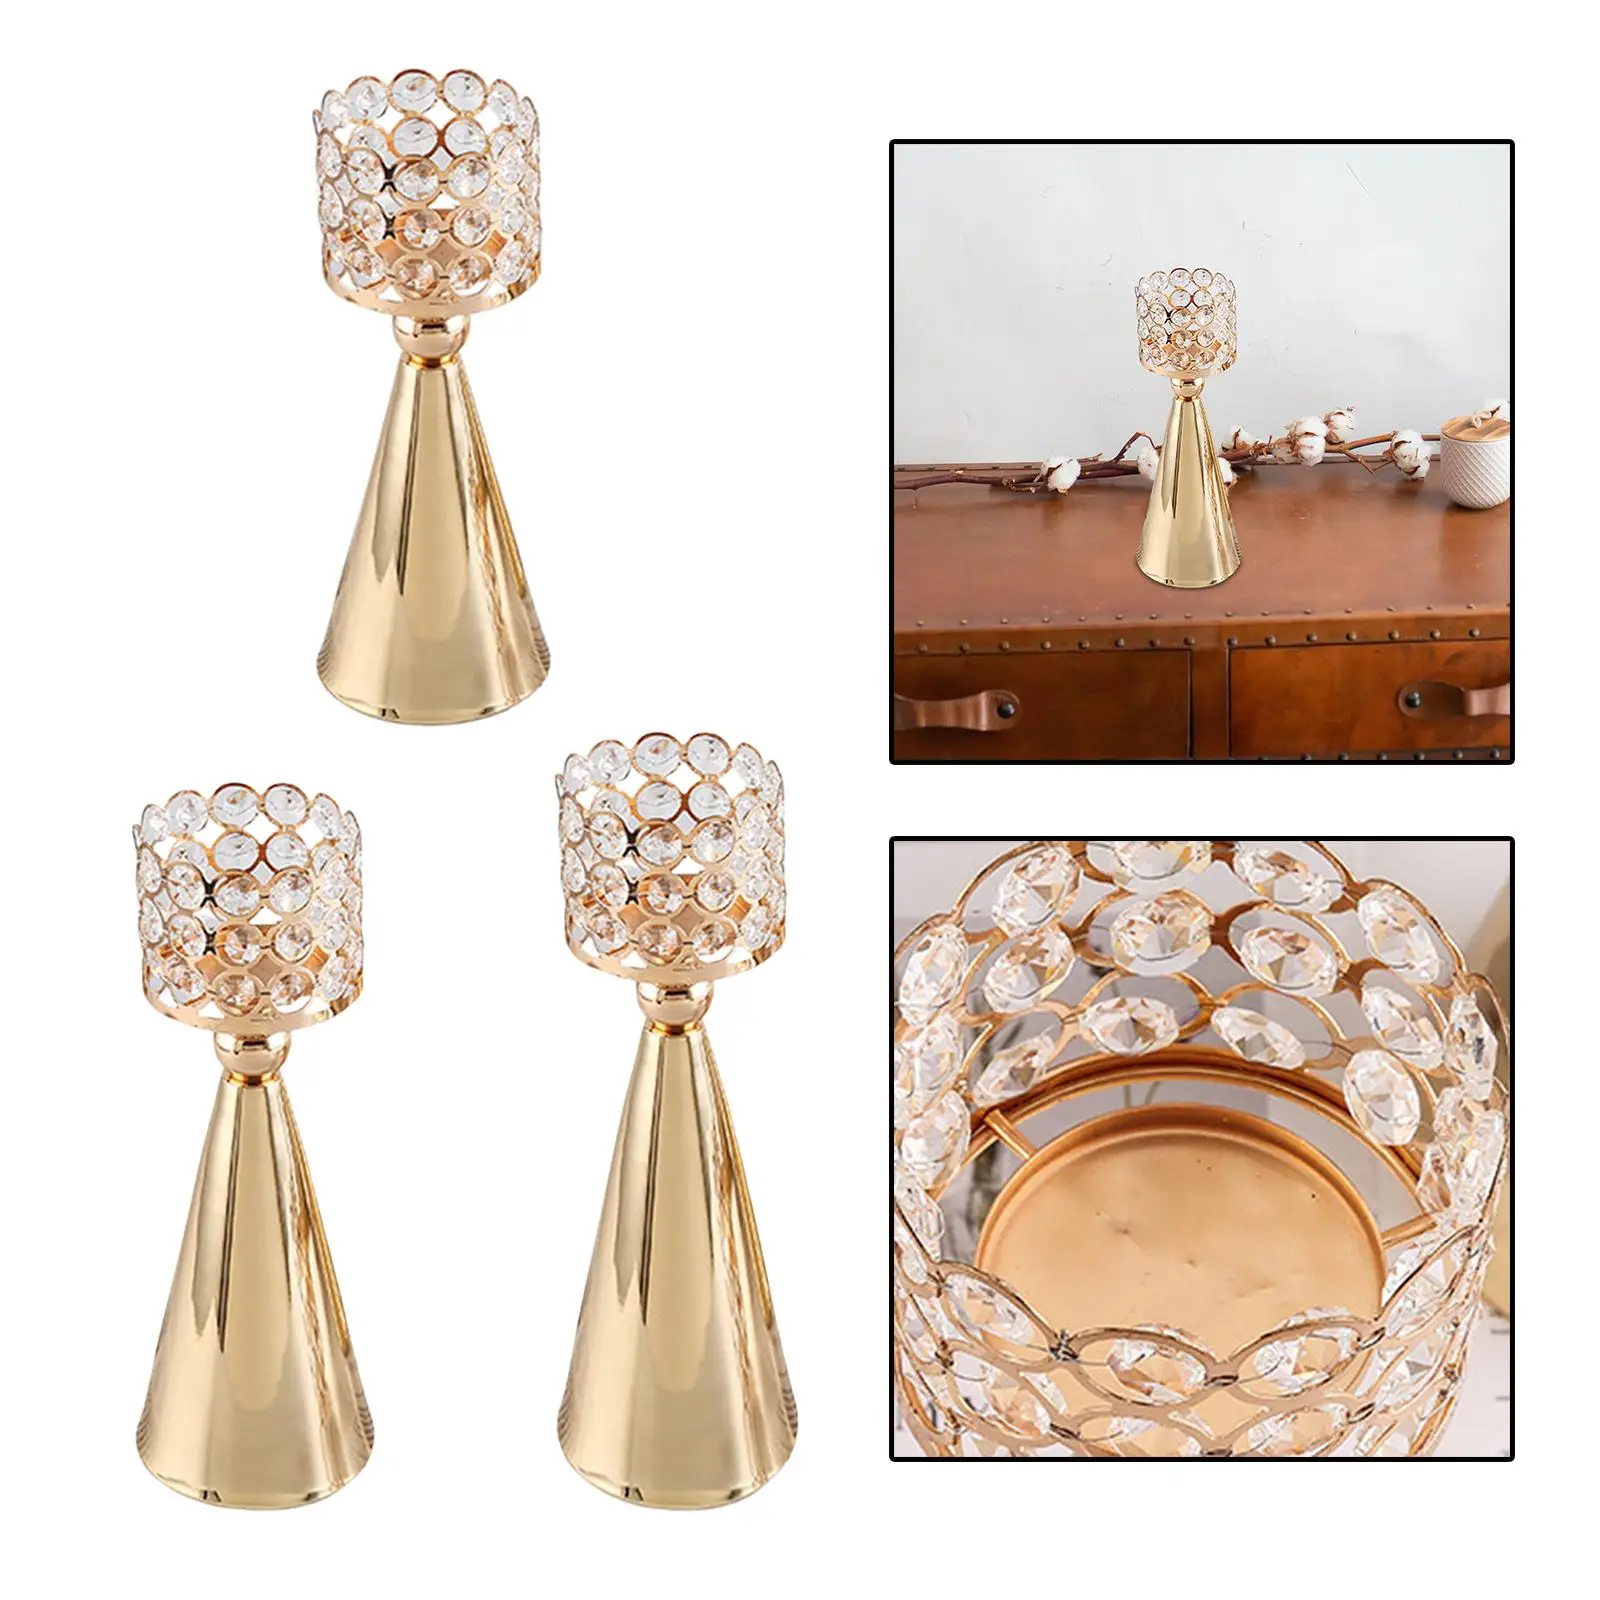 Holder Luxury with Deluxe Design Elegant Pillar Candlestick for Wedding Anniversary Table Centerpiece Celebration Dining Room